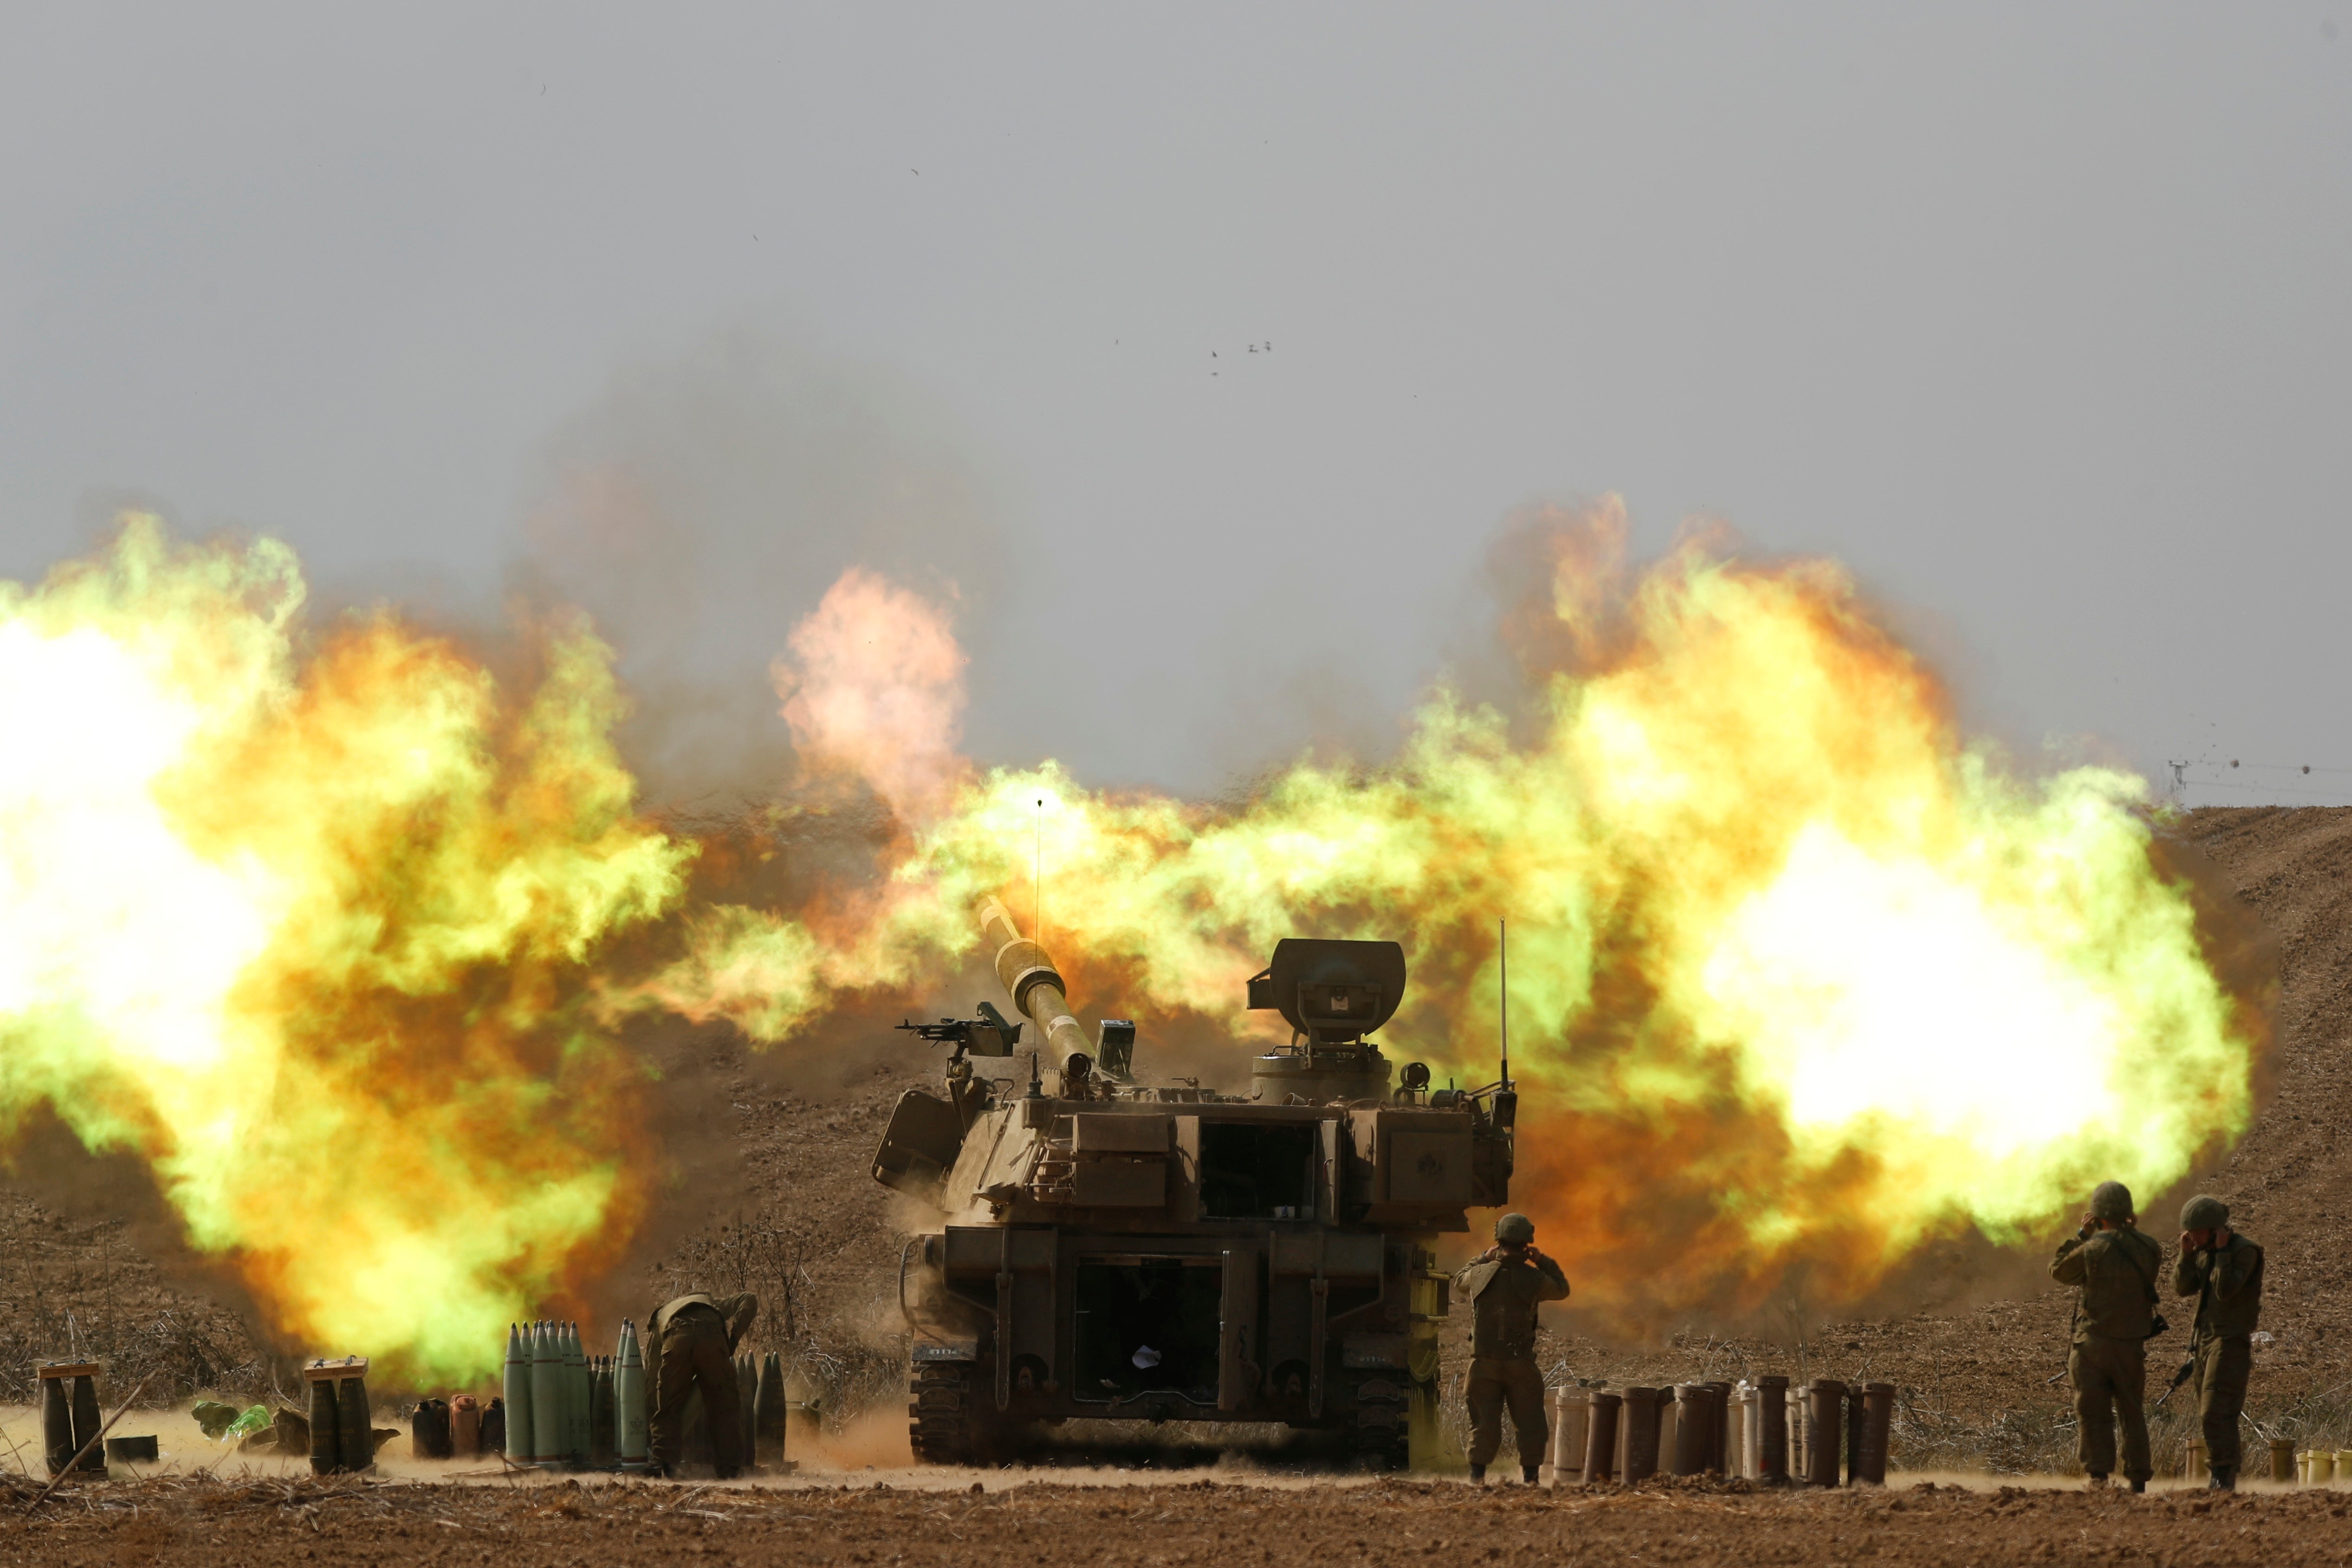 An Israeli artillery unit fires towards Gaza along the border in southern Israel on Wednesday